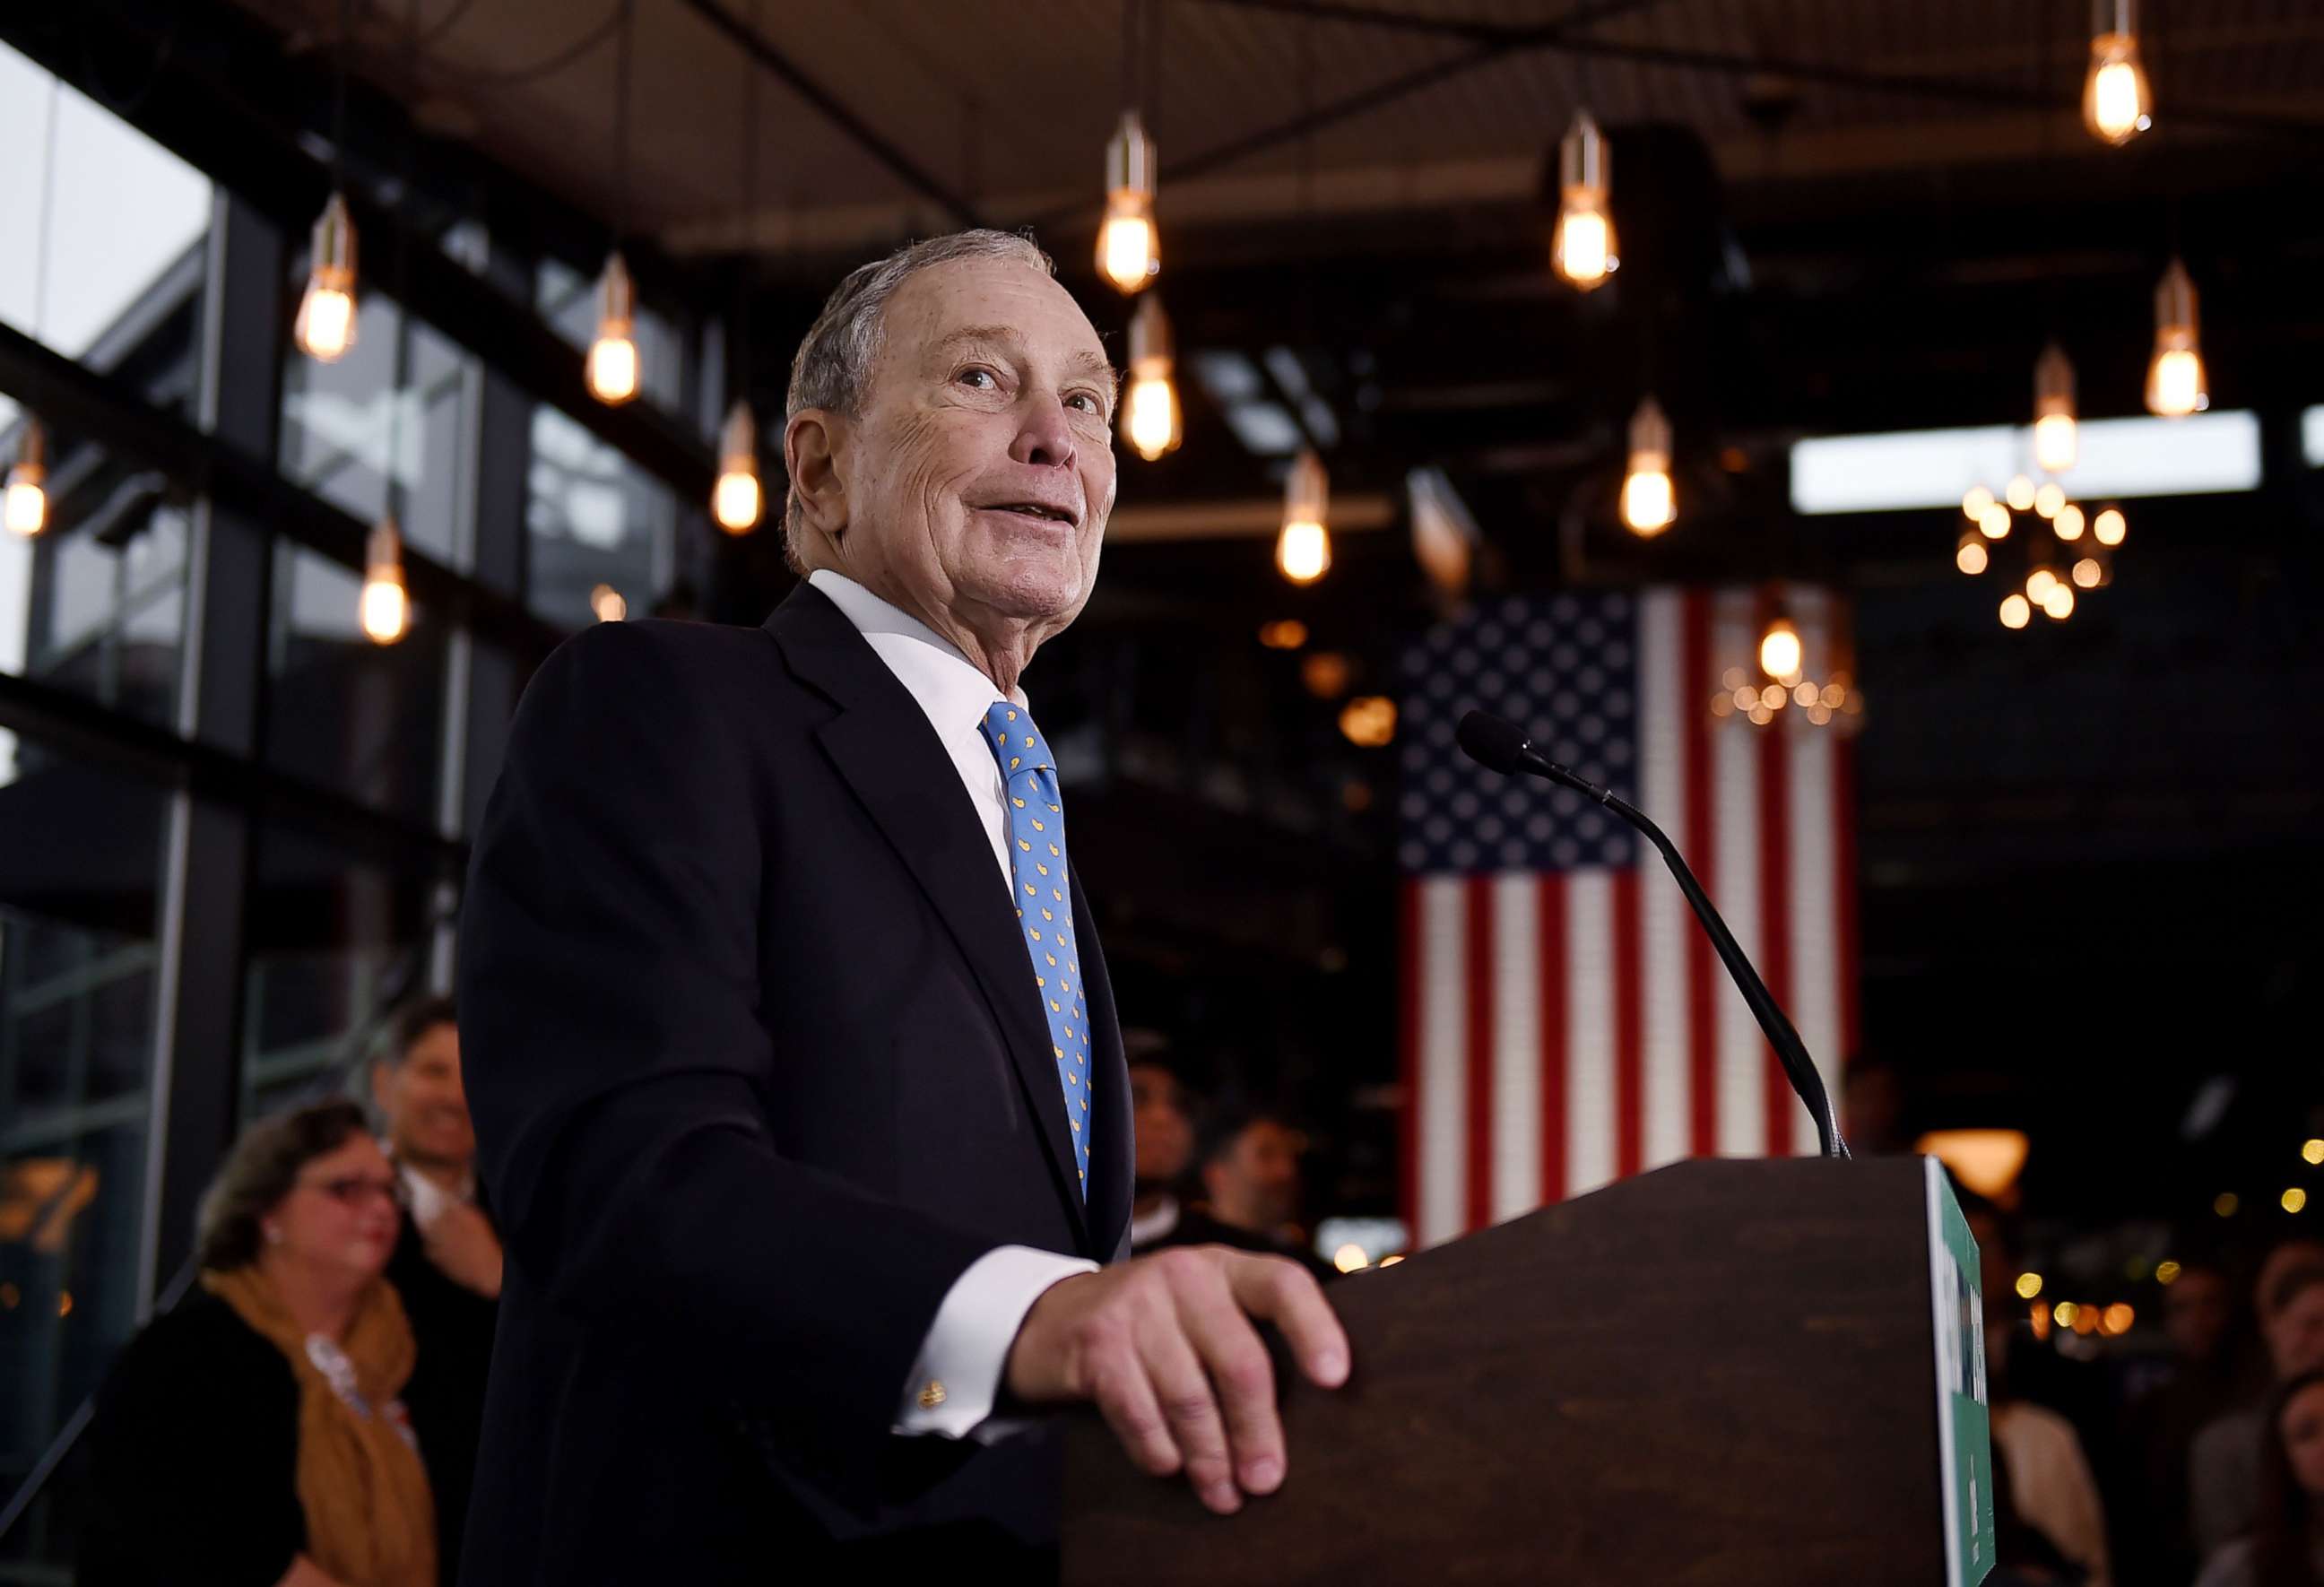 PHOTO: Democratic presidential candidate Michael Bloomberg speaks about his plan for clean energy during a campaign event at the Blackwall Hitch restaurant in Alexandria, Va., Dec. 13, 2019.